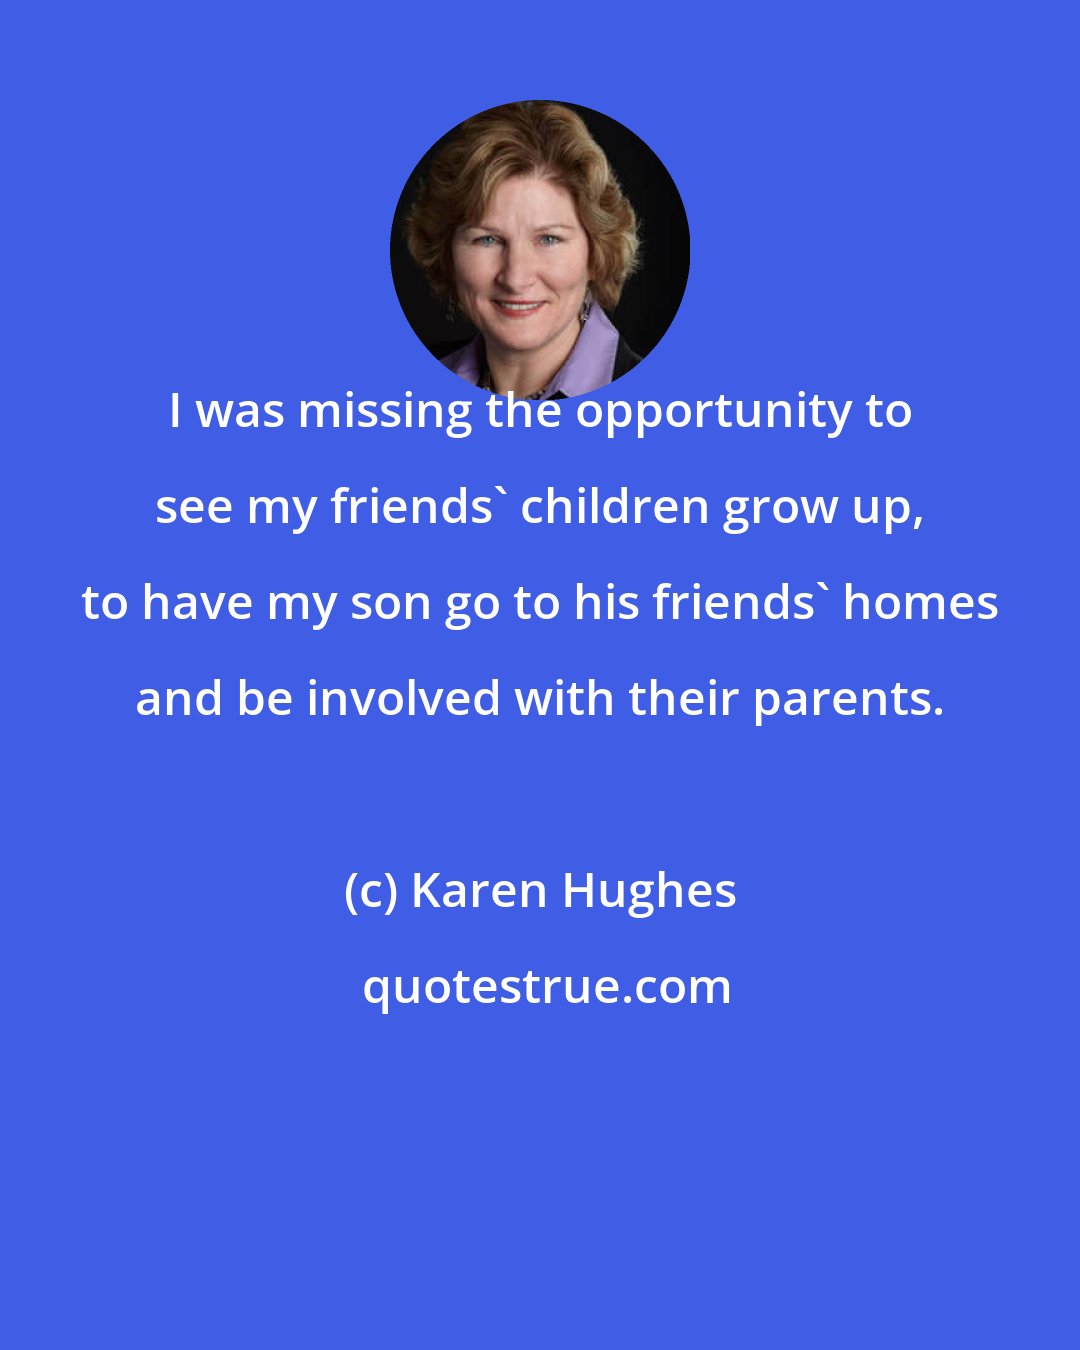 Karen Hughes: I was missing the opportunity to see my friends' children grow up, to have my son go to his friends' homes and be involved with their parents.